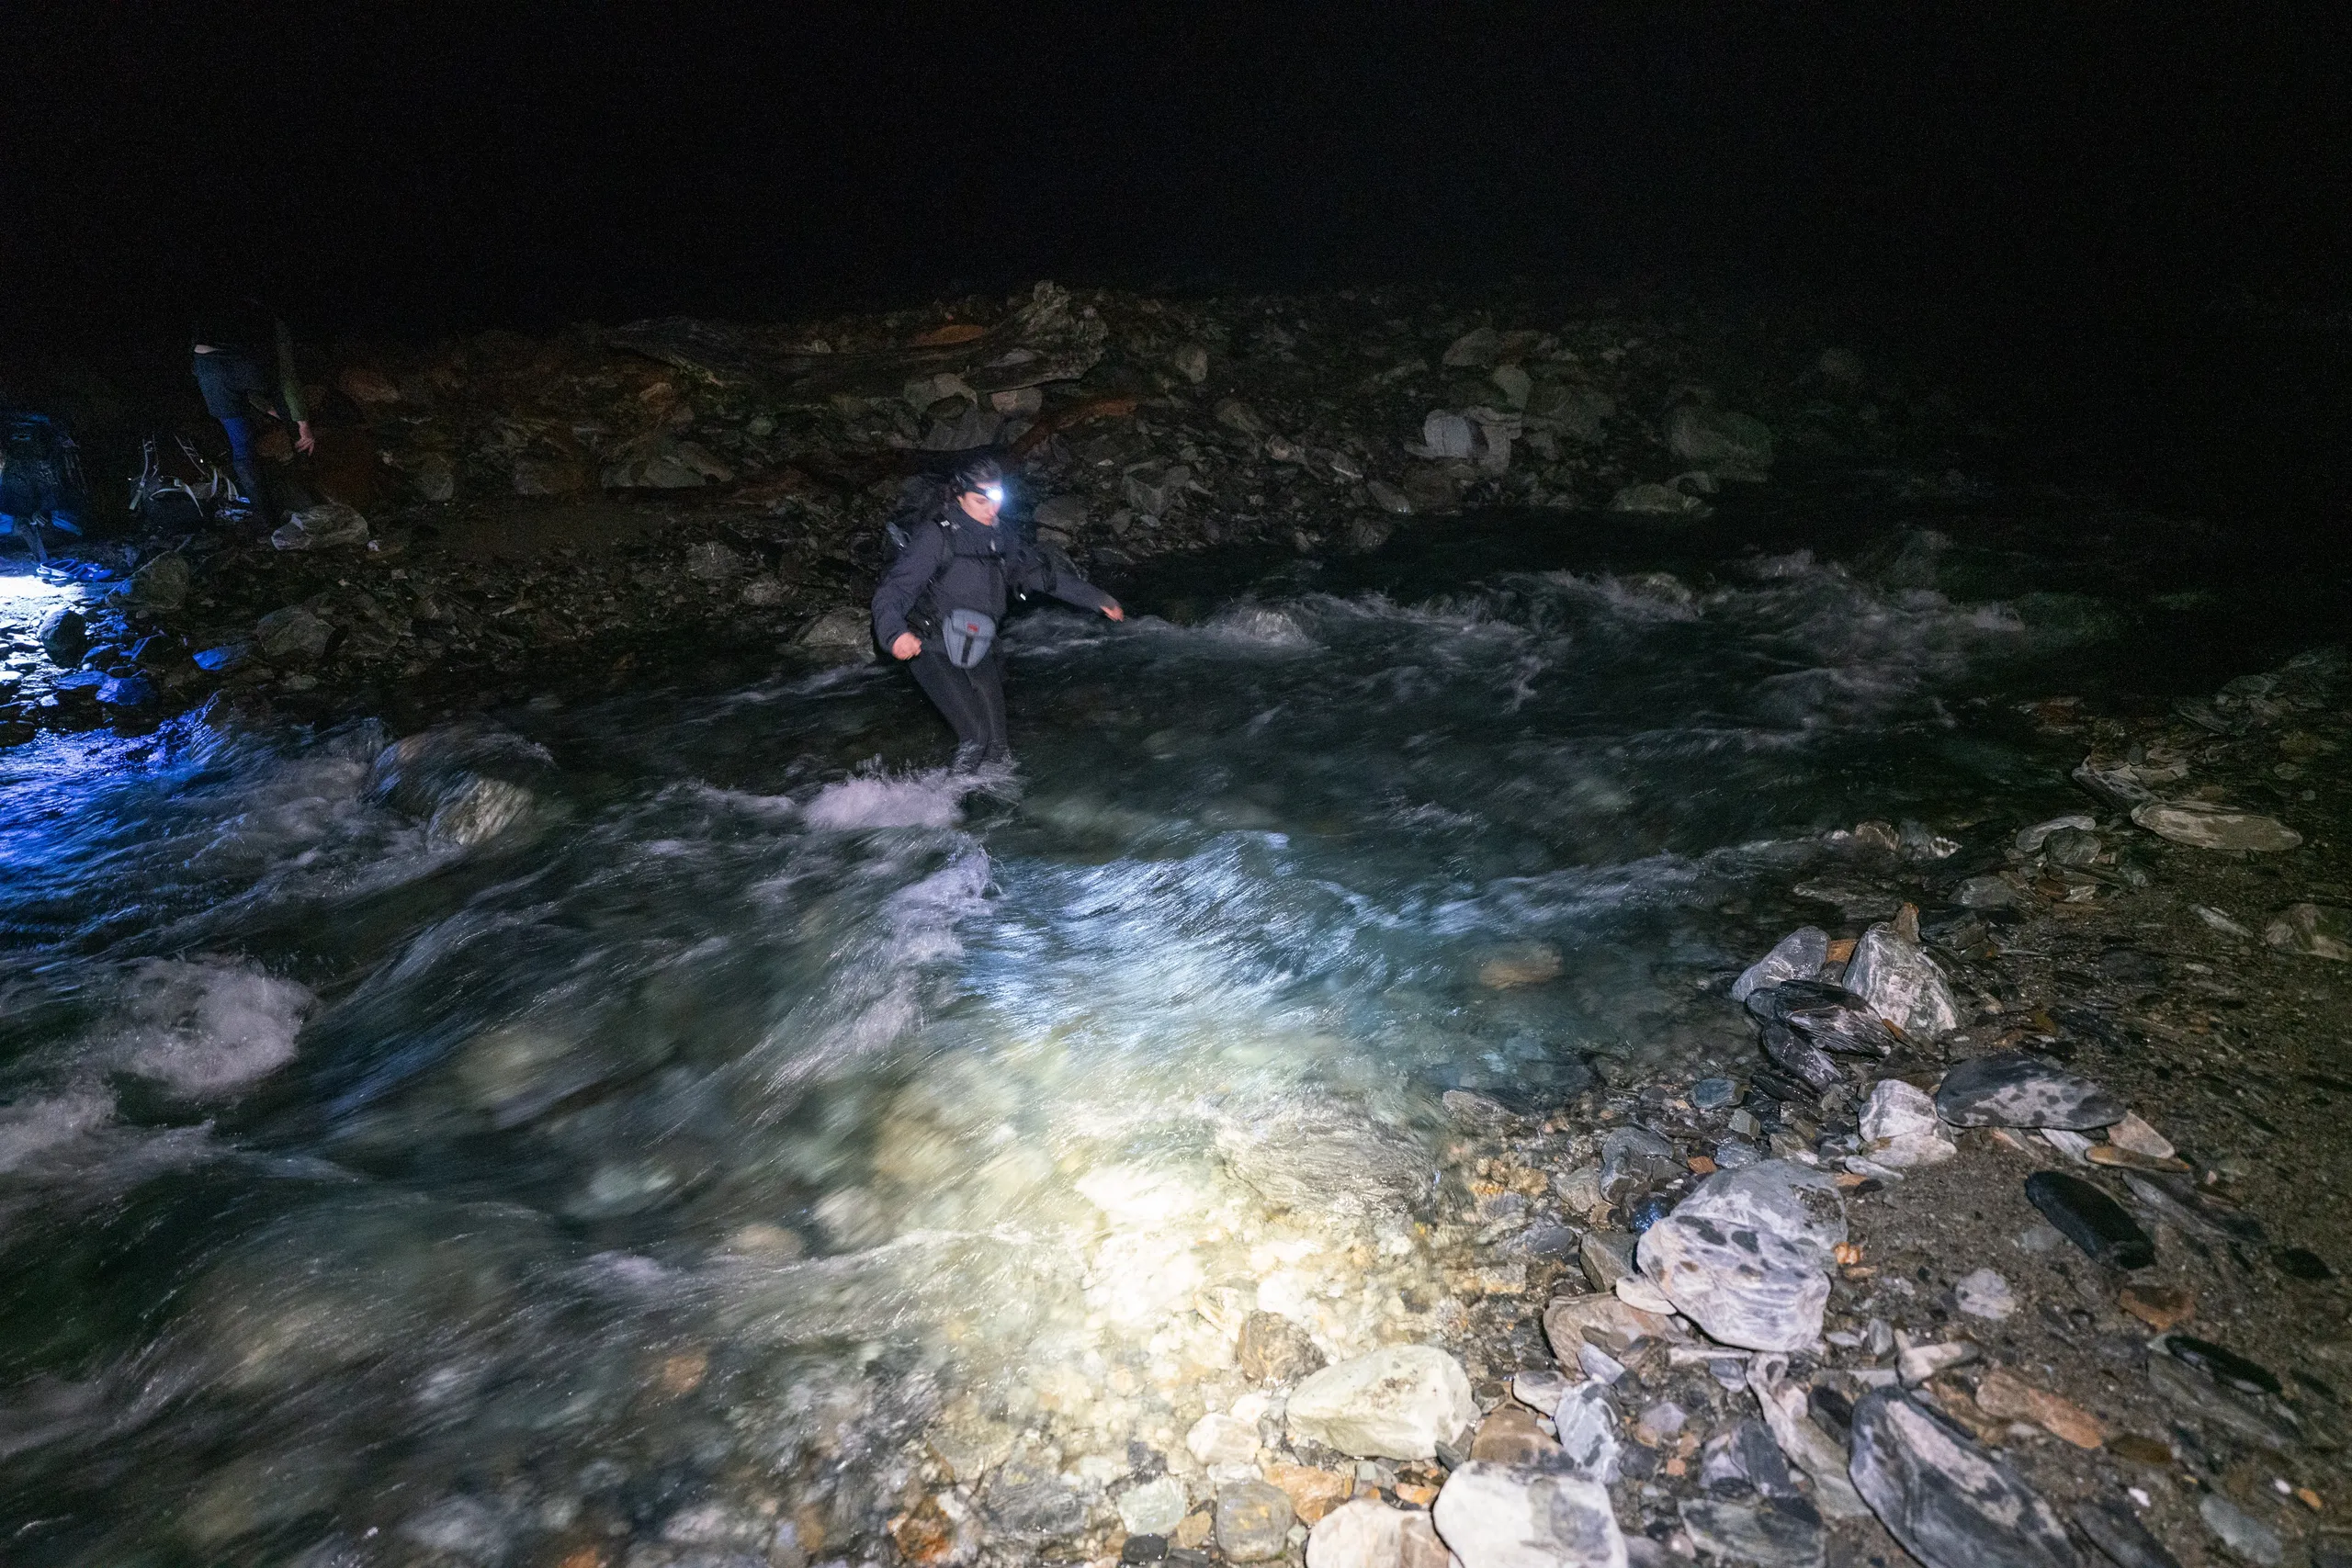 Nighttime crossing of the river just before Dillons Homestead Hut.